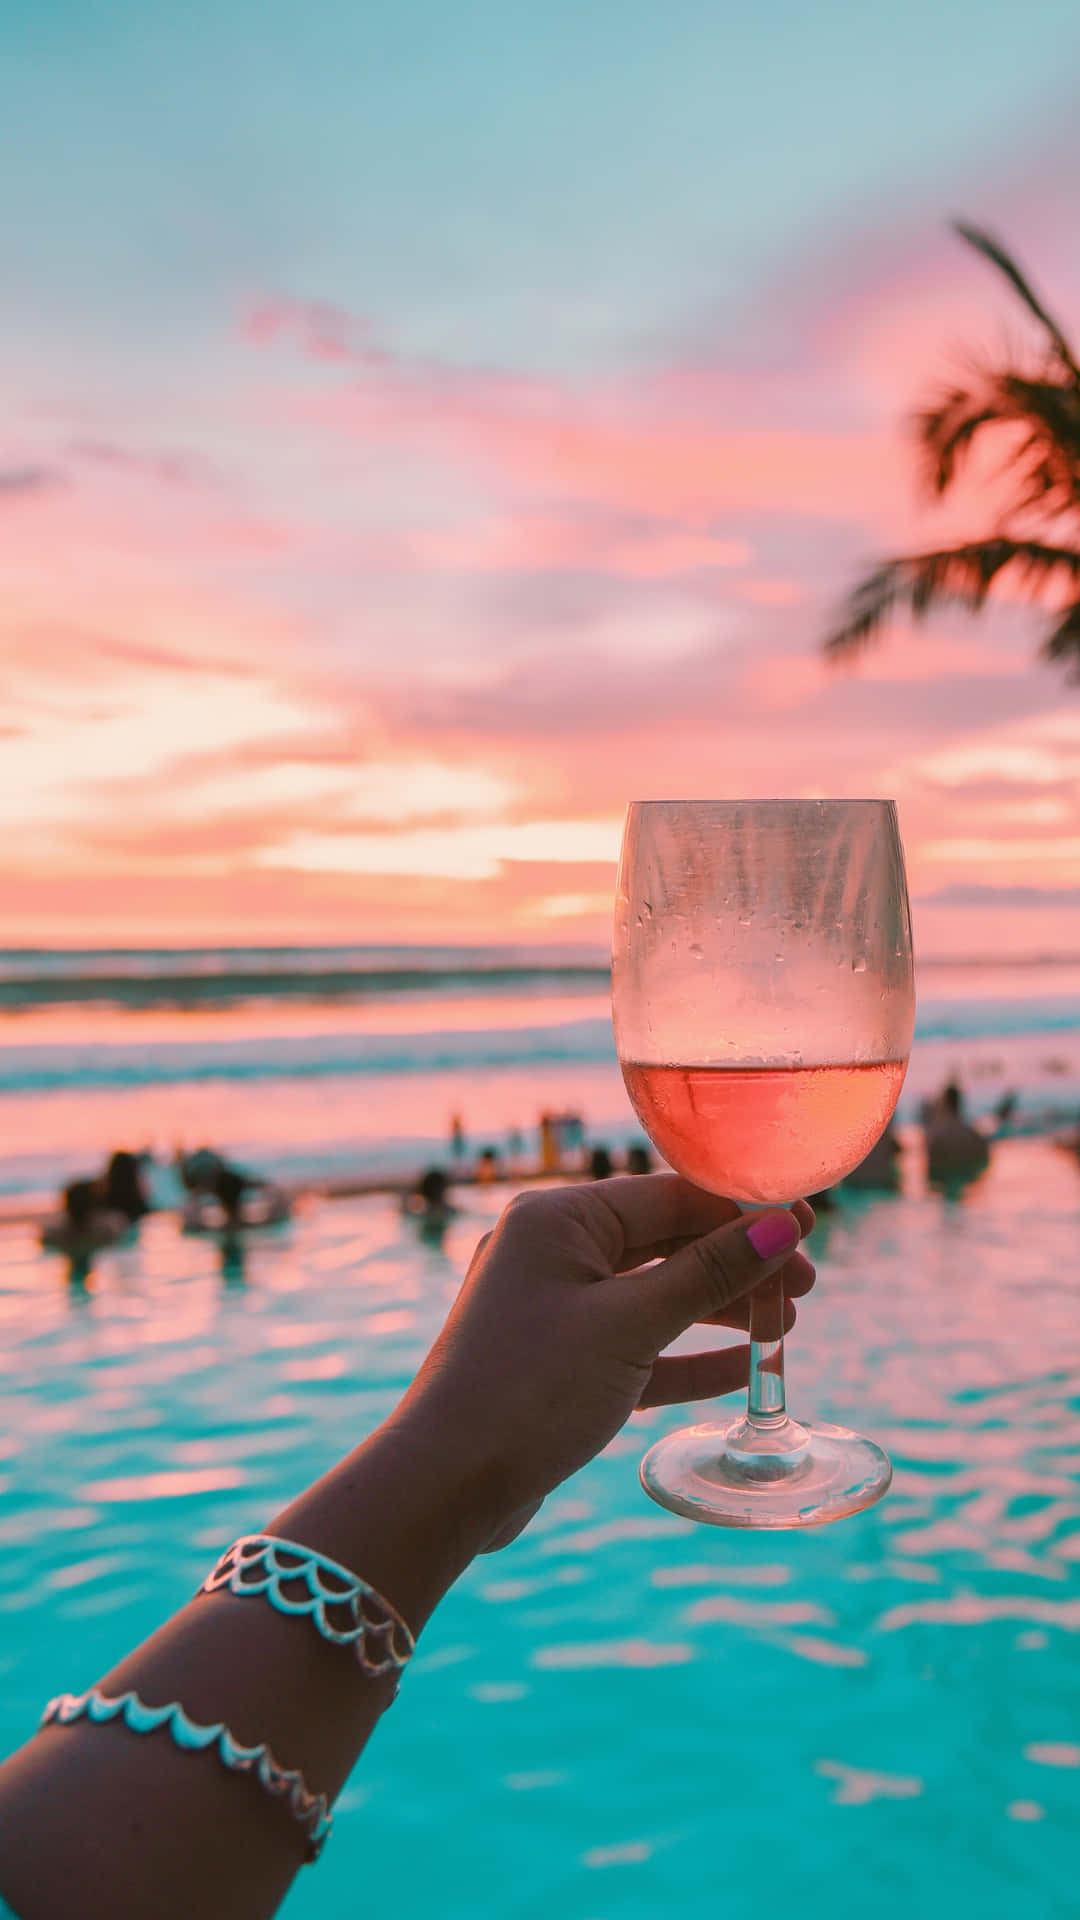 Aesthetic Summer Picture Rose Wine